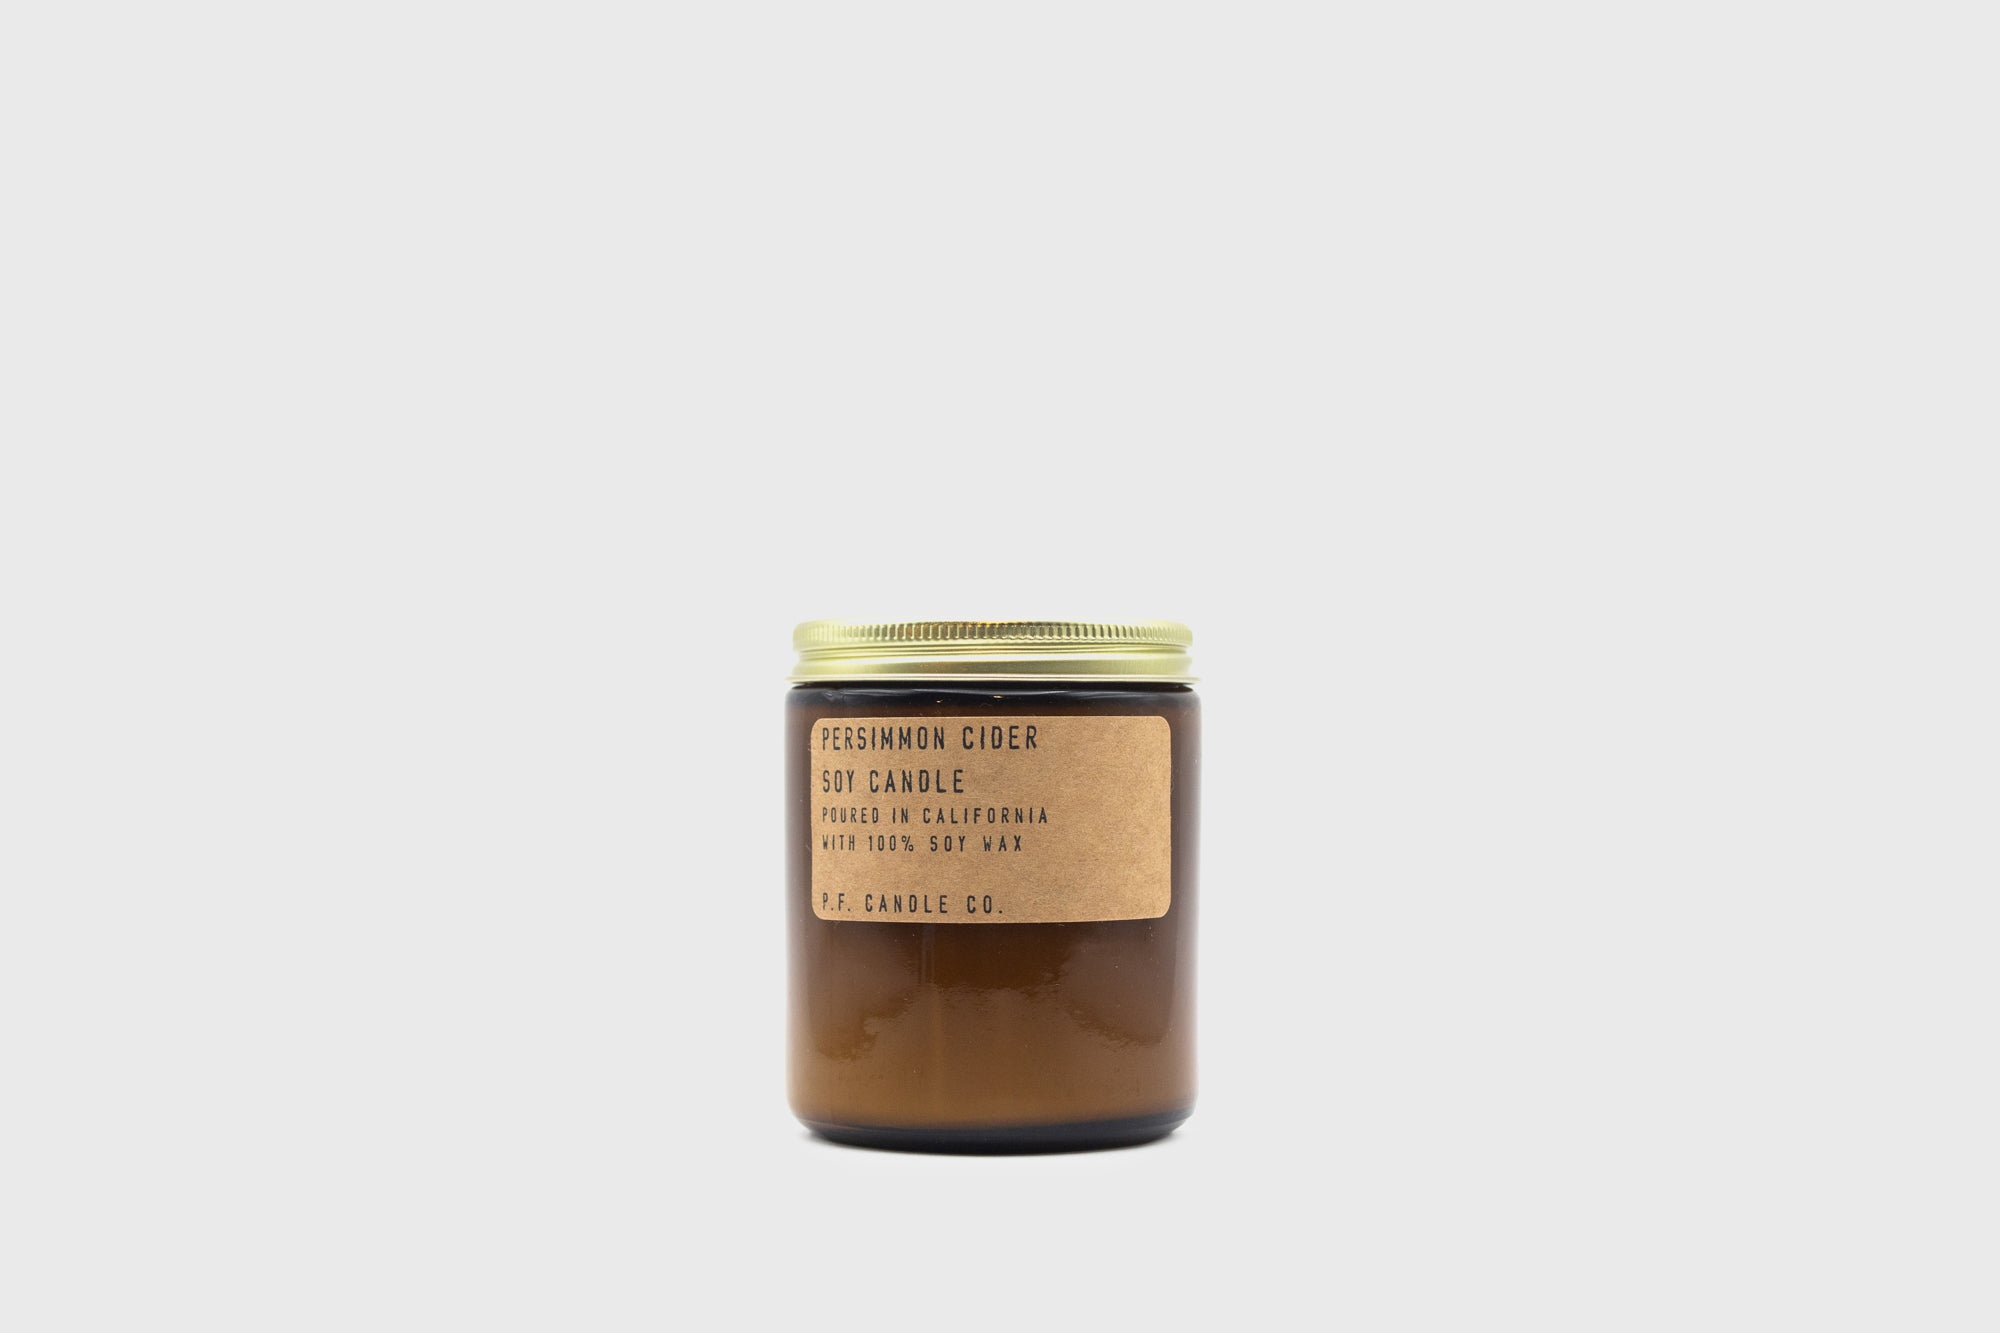 Soy Candle [Persimmon Cider] Candles &amp; Home Fragrance [Homeware] P.F. Candle Co.    Deadstock General Store, Manchester